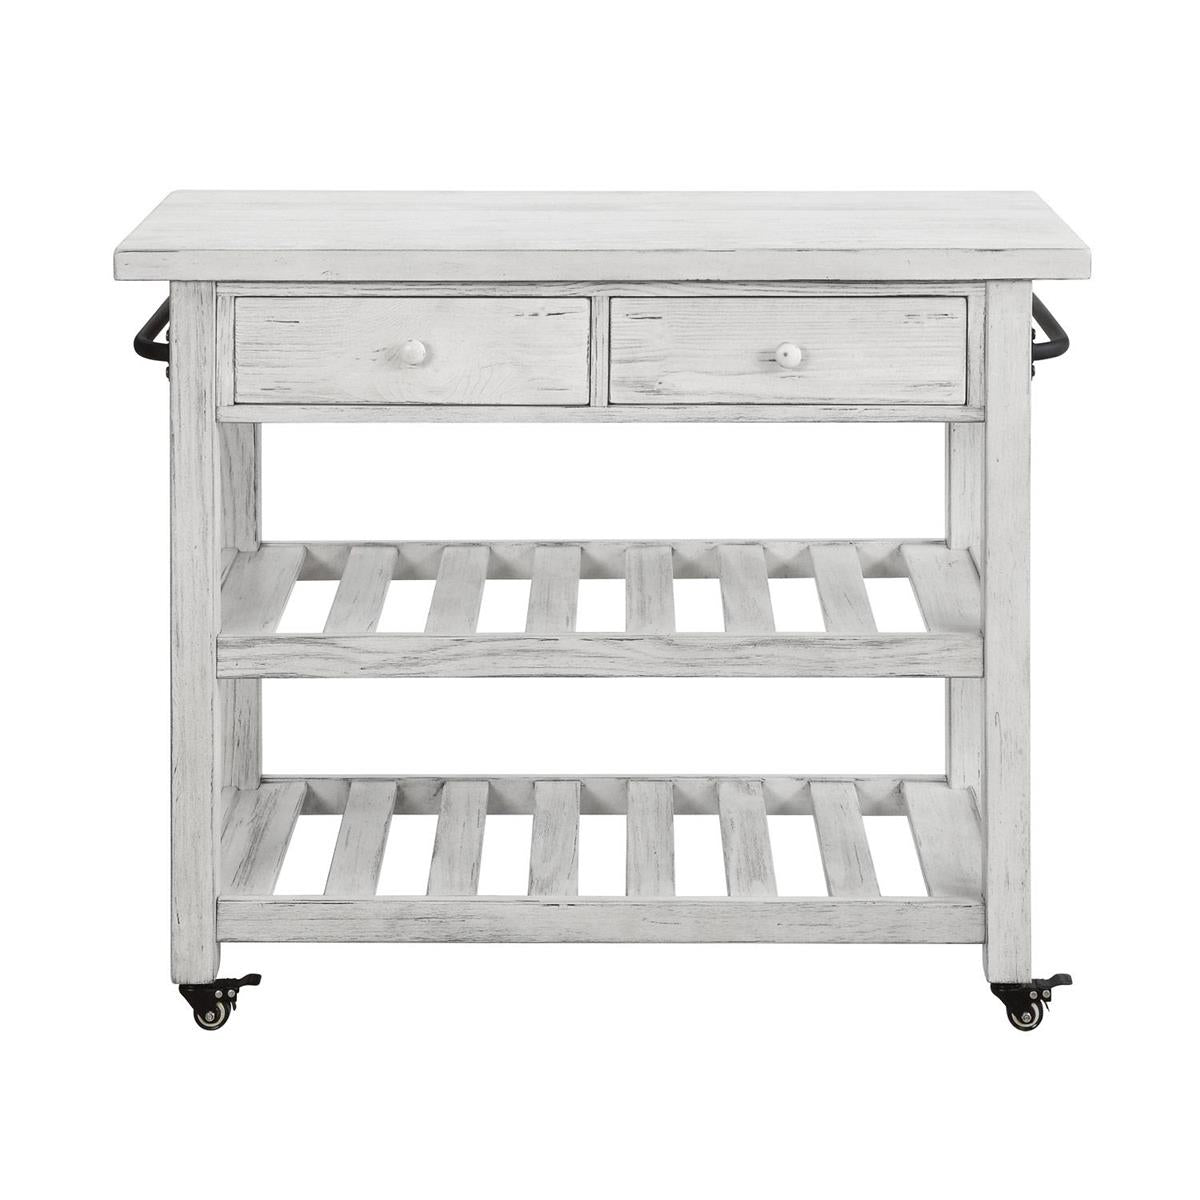 WEEKLY or MONTHLY. Orchard Brown Kitchen Cart